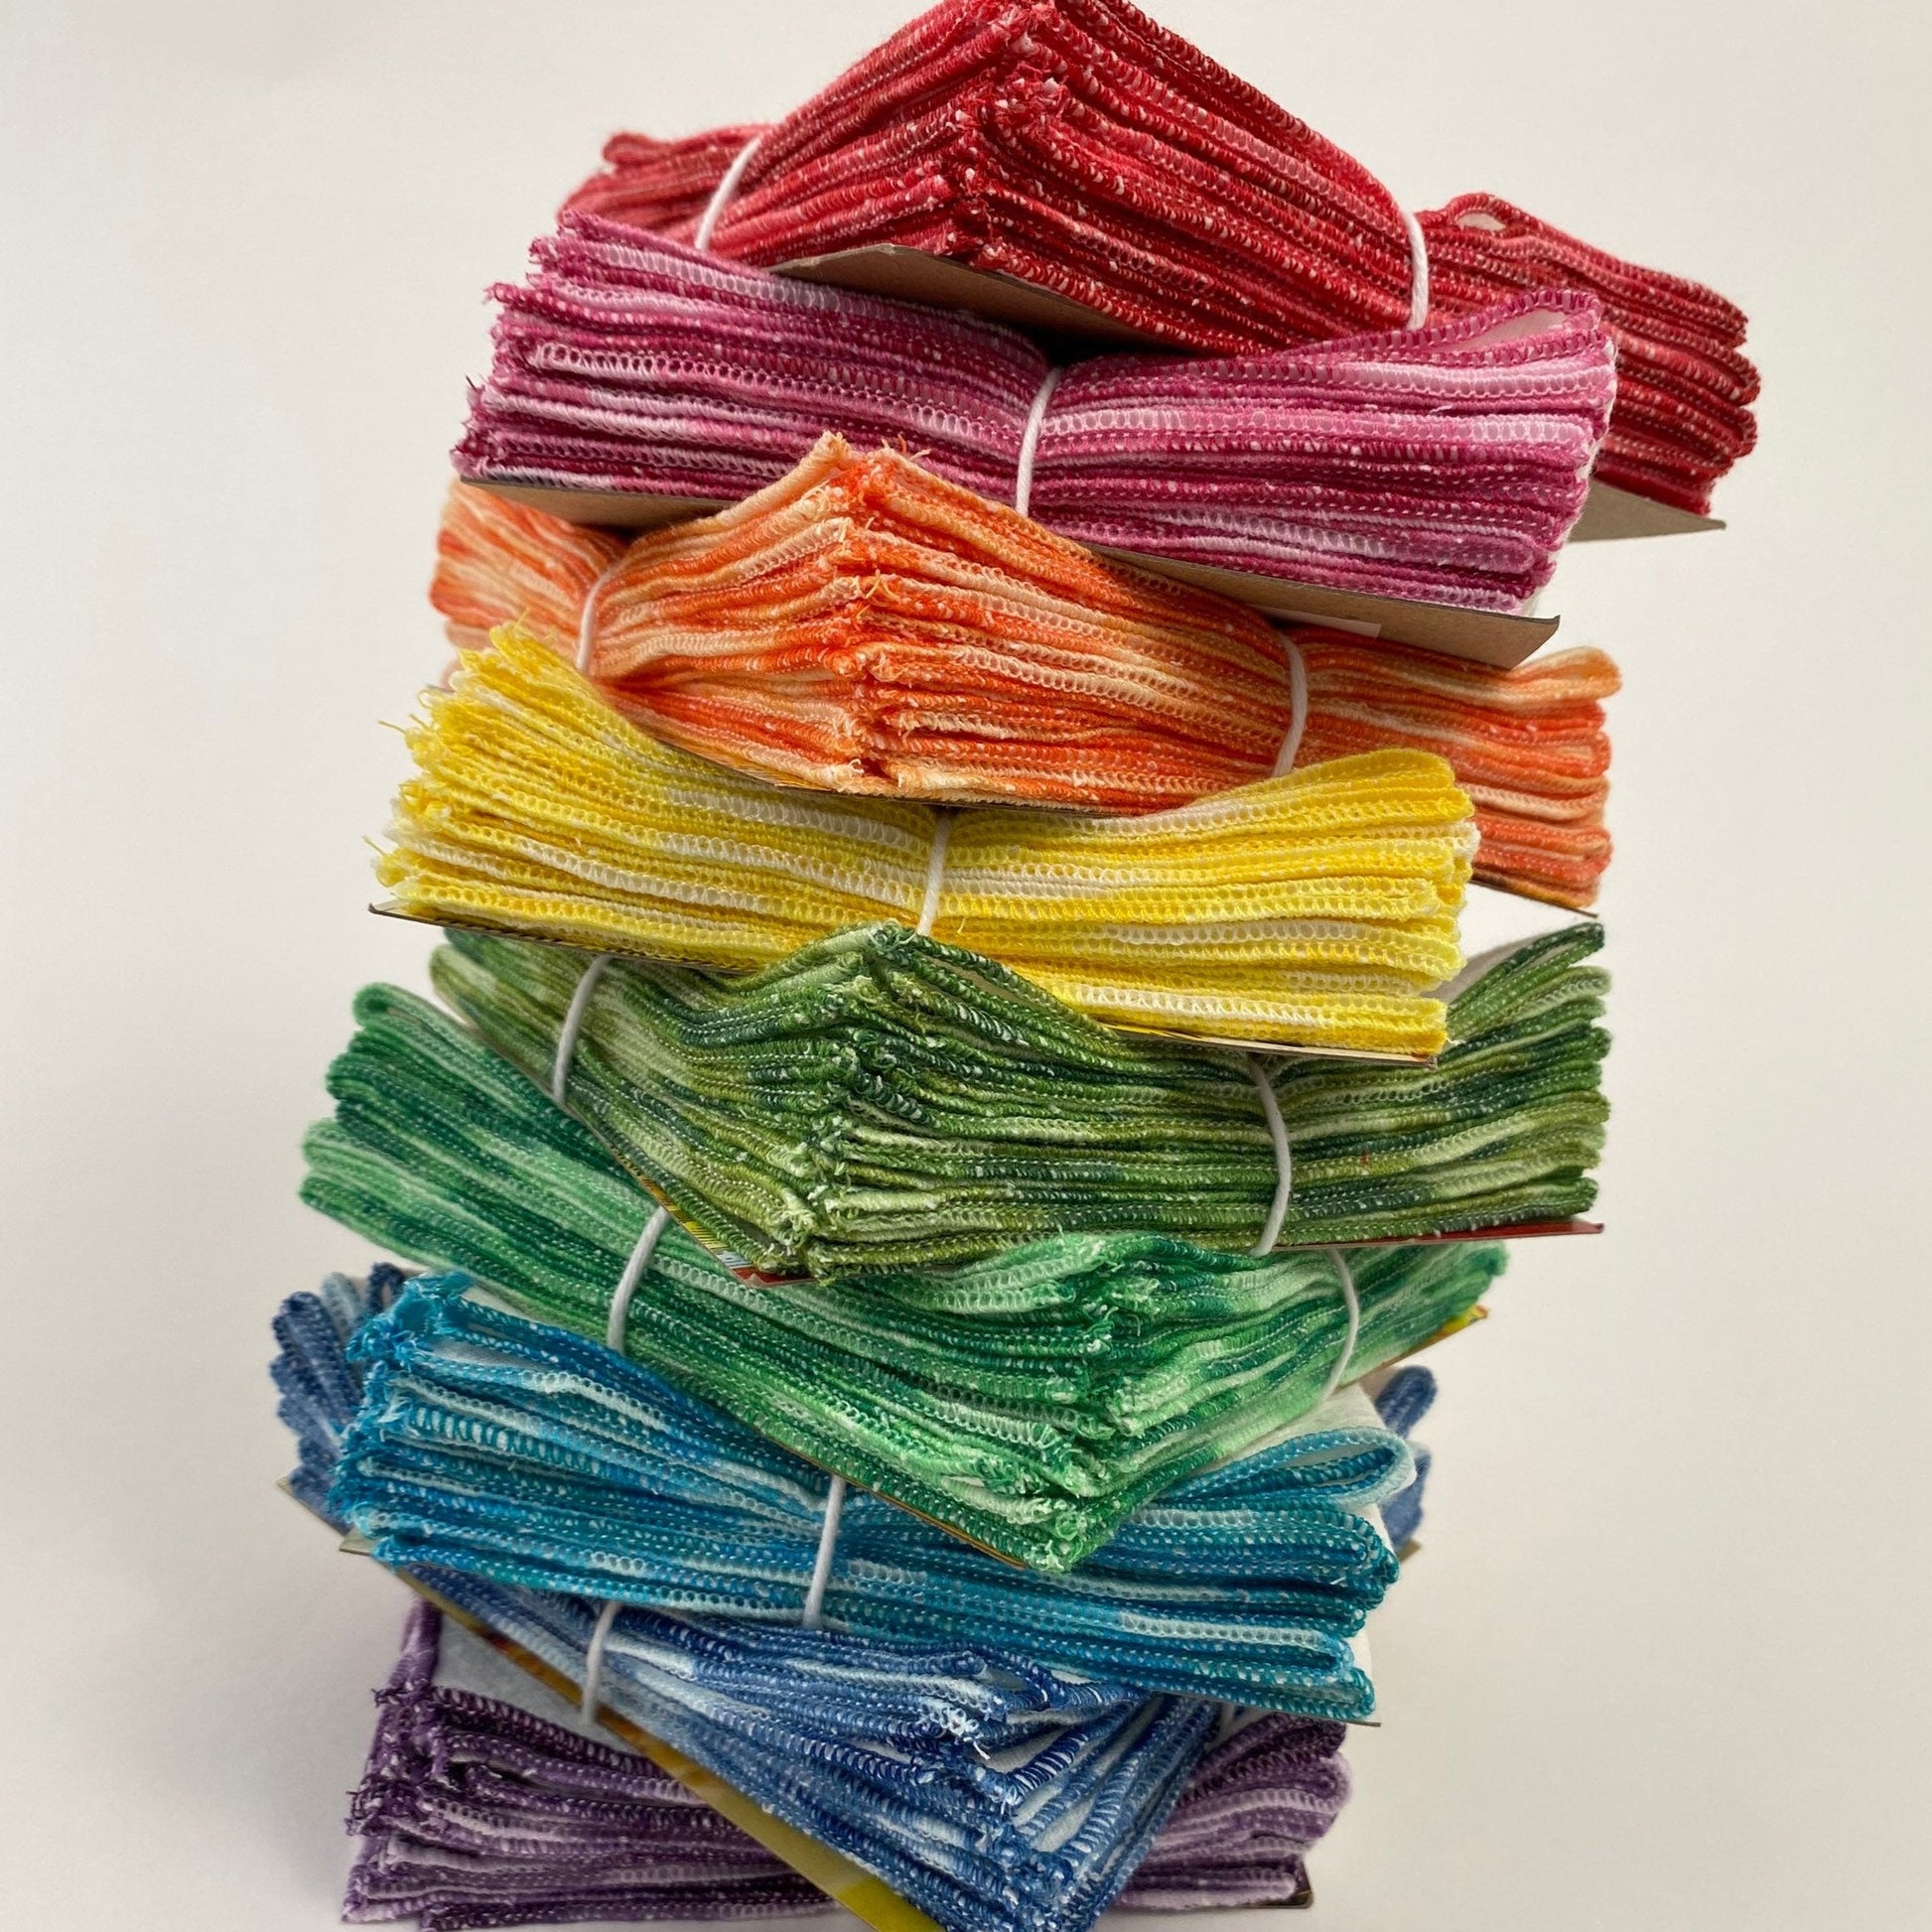 Stack of Colorful Everyday Cotton Cloth Napkins Red Pink Orange Yellow Green Aqua Blue Purple